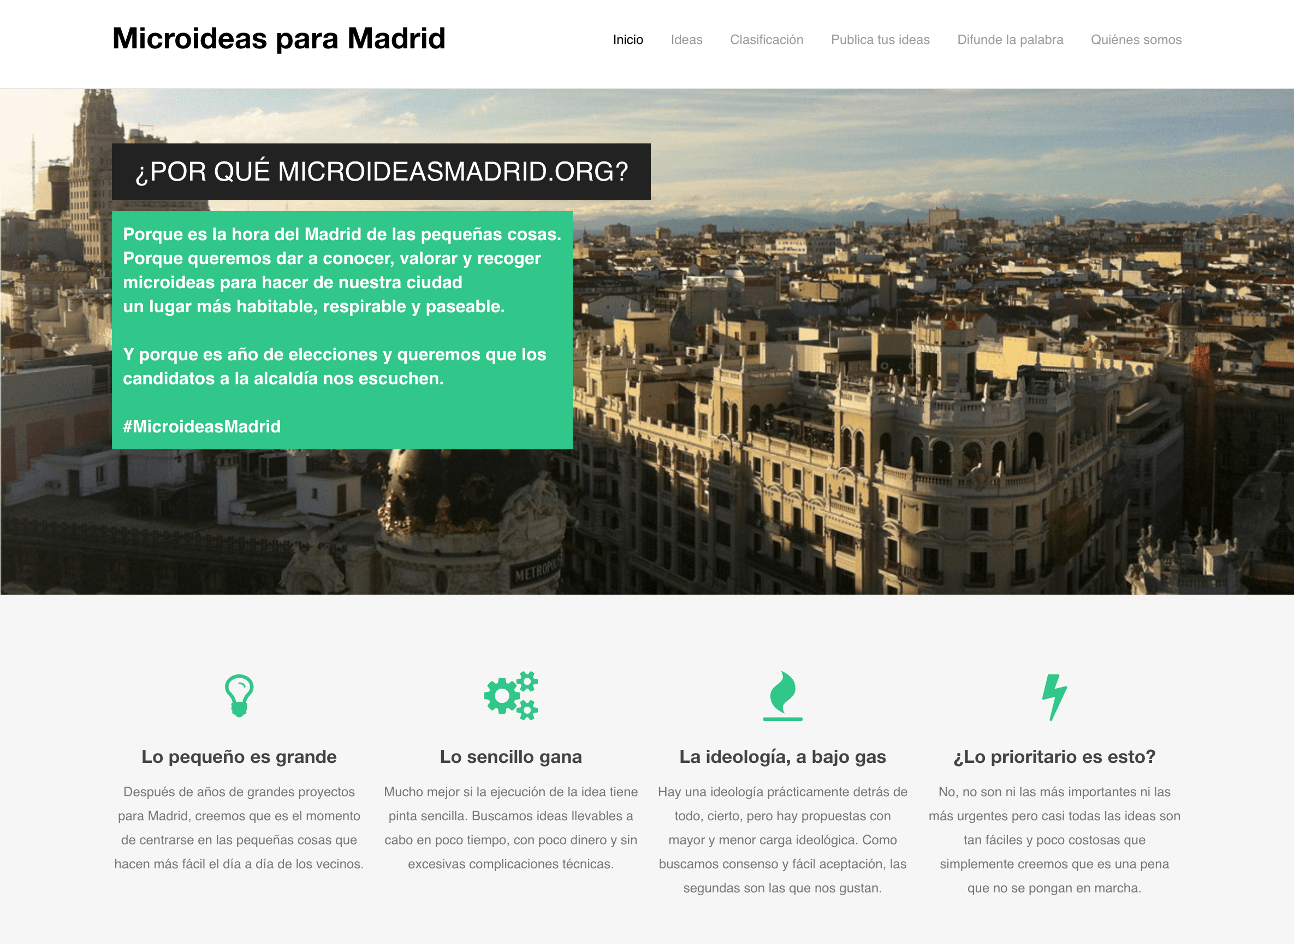 Microideas for Madrid – A digital platform to improve the city